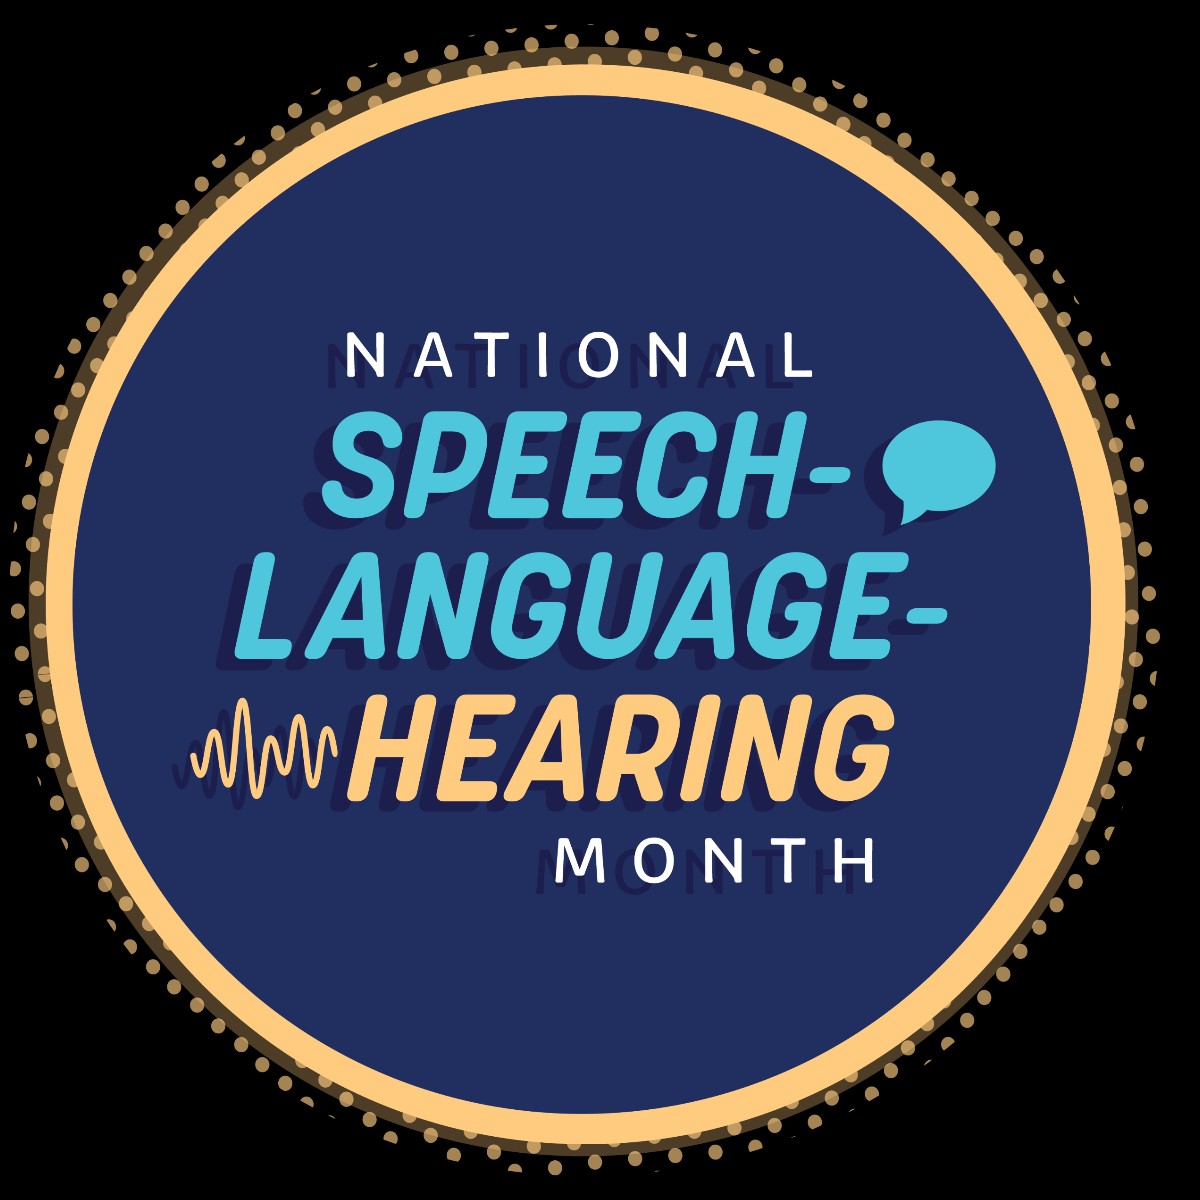 May is #NationalSpeechLanguageHearingMonth… devoted to raising awareness for communication disorders & hearing health. Making eye contact when speaking, speaking clearly & reducing noise are a few ways you can help those with hearing loss. Learn more: brnw.ch/21wJmaq!